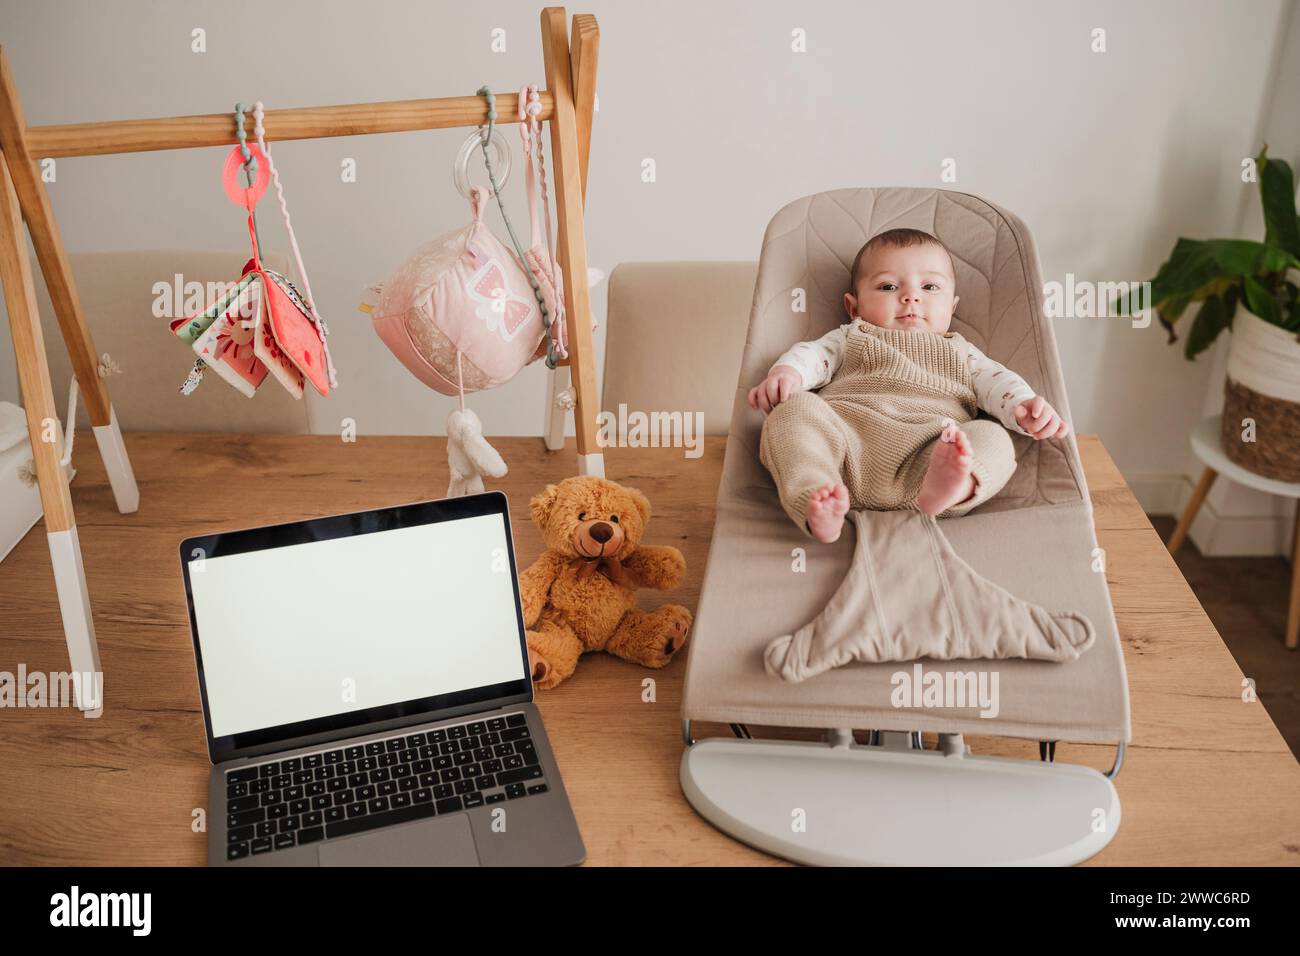 Cute baby girl sitting on bouncer chair near laptop at home Stock Photo